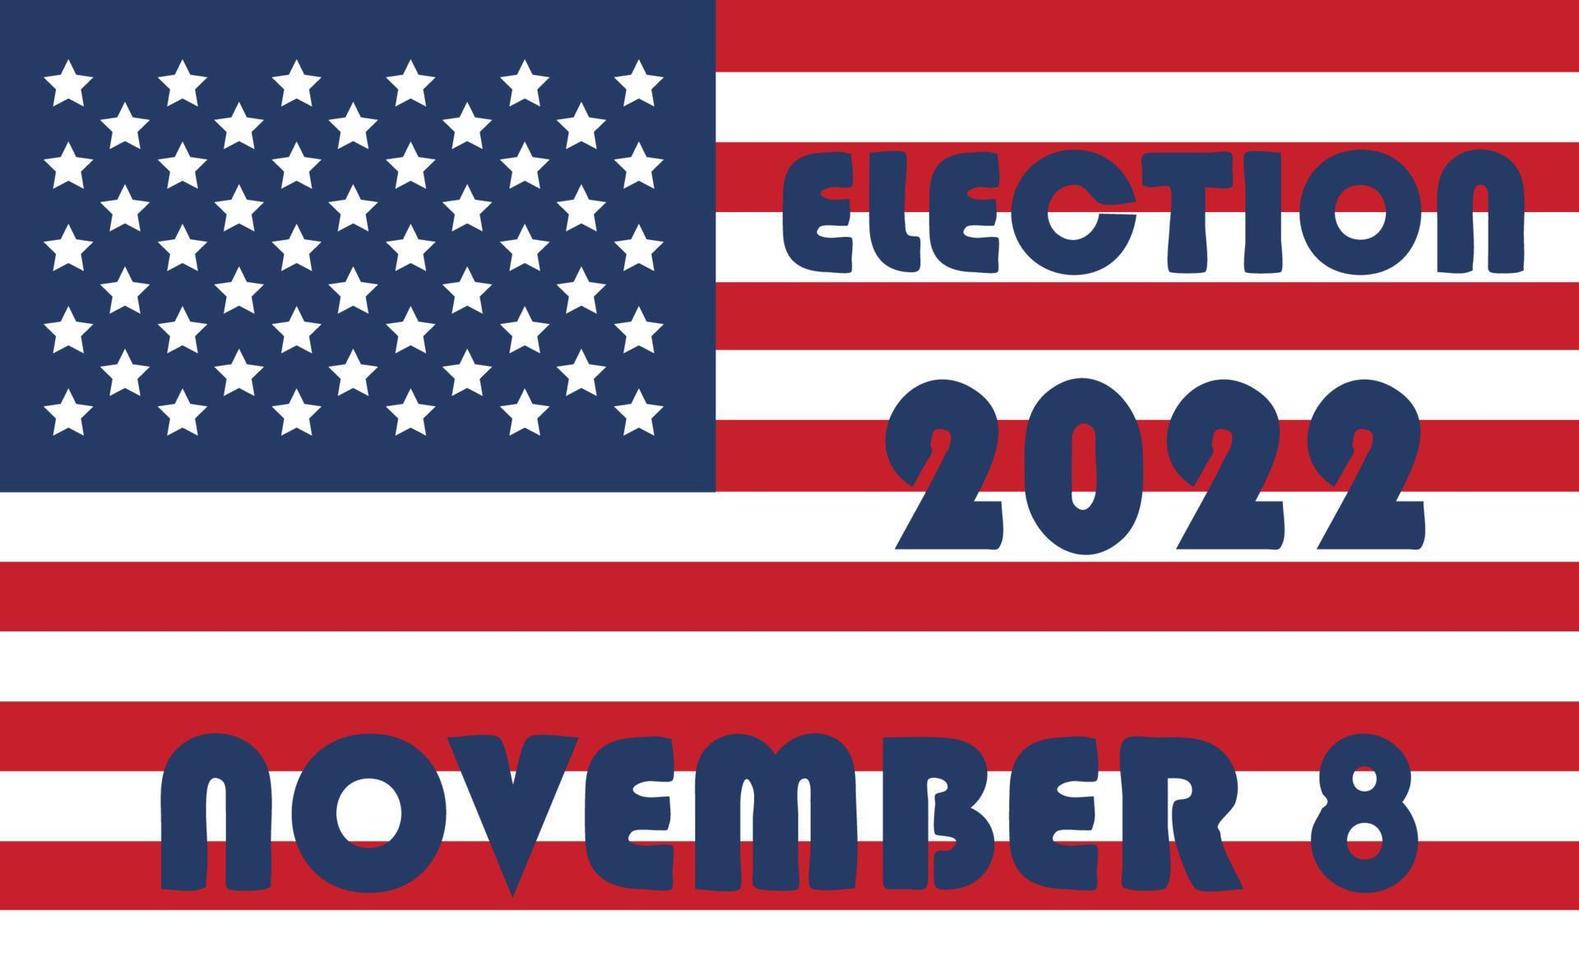 Day of mid-term elections. Vote 2022 USA, banner design. Political election campaign vector